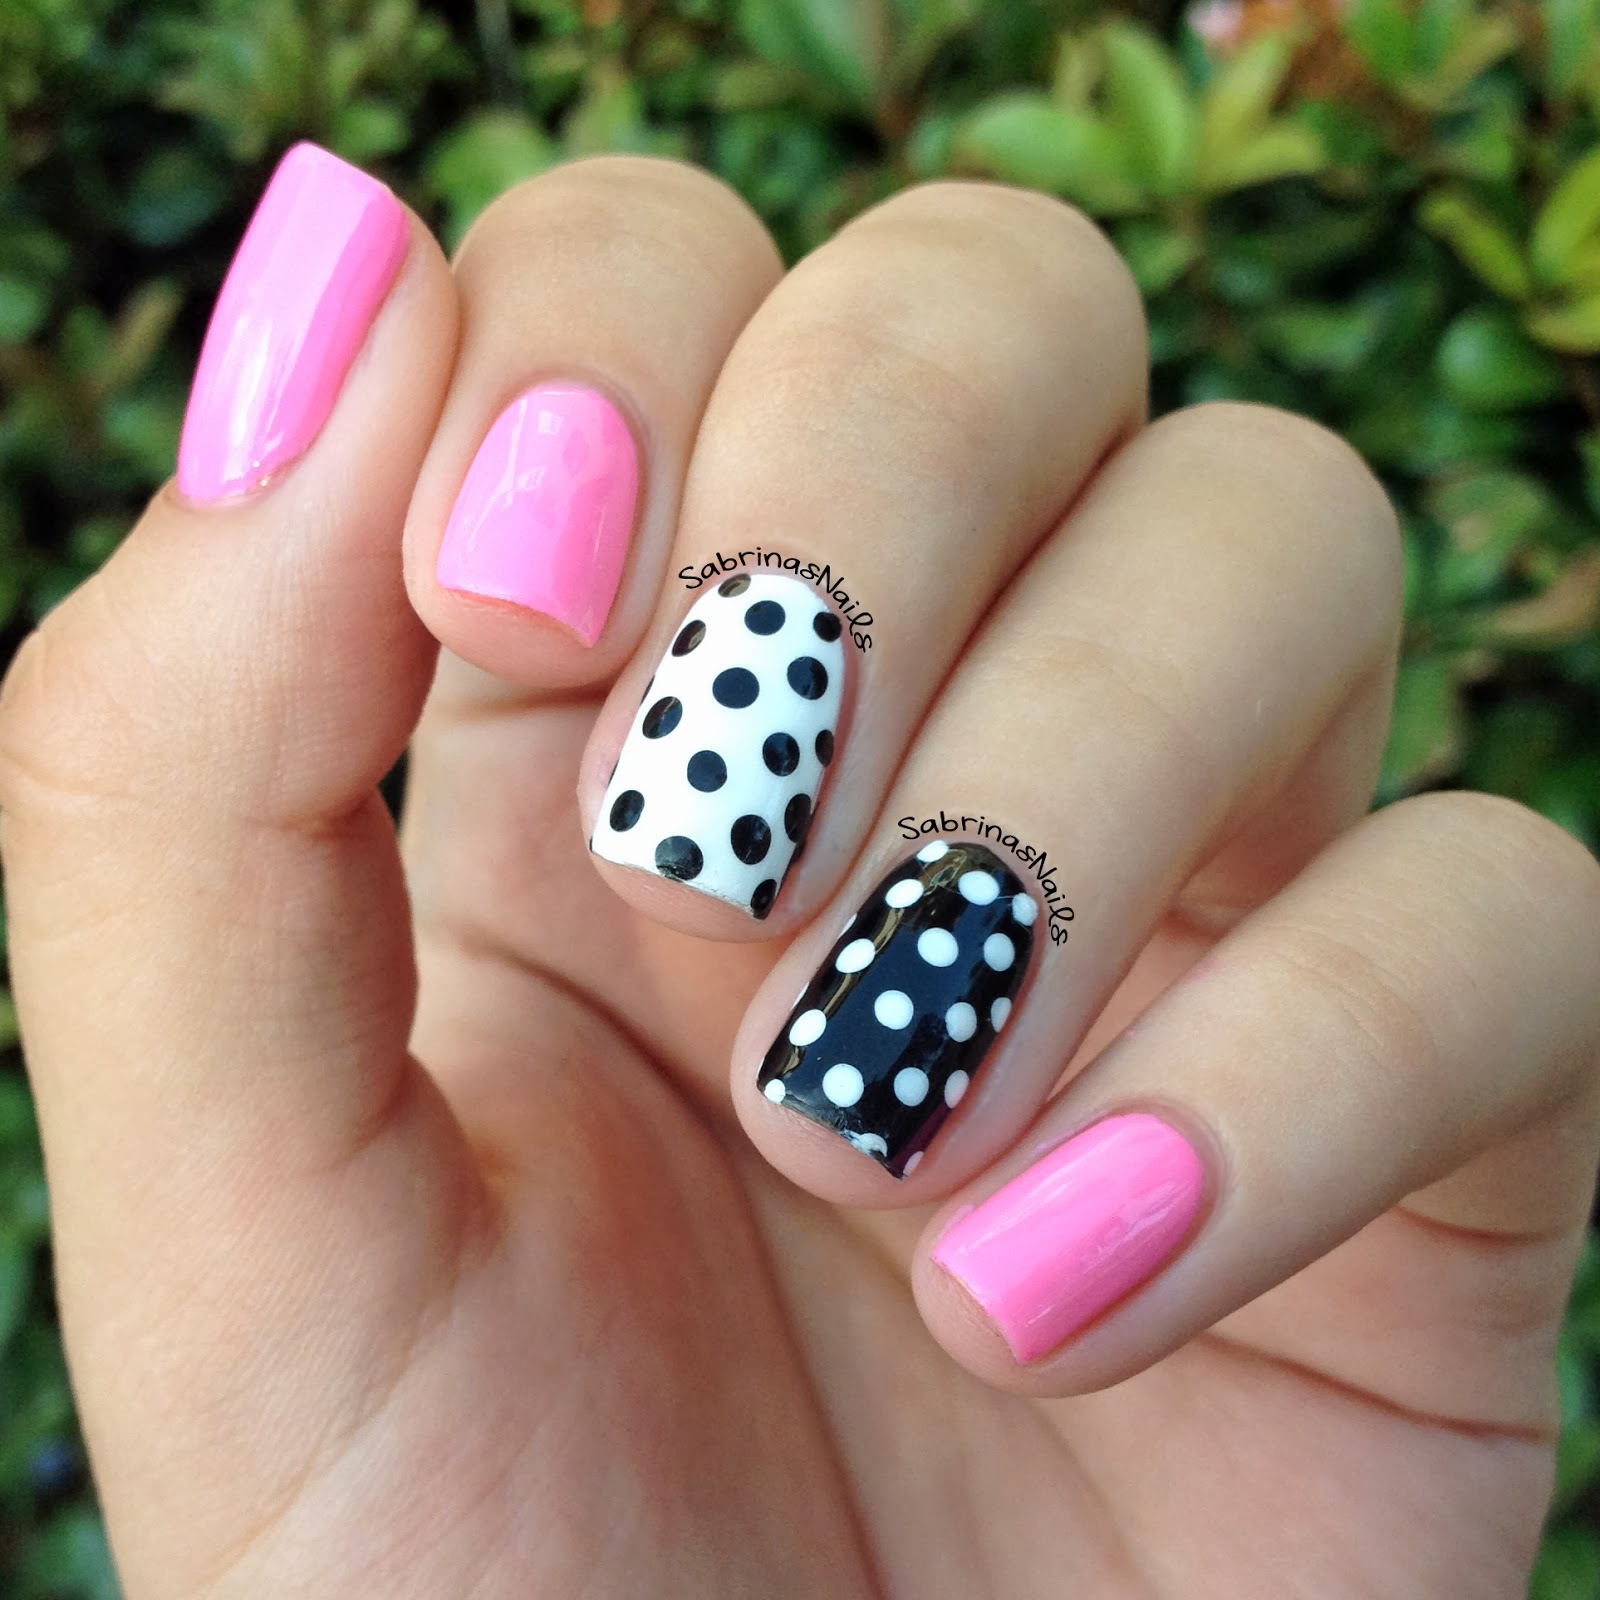 Nail Design with White Dots. Stock Photo - Image of nails, french: 47275908